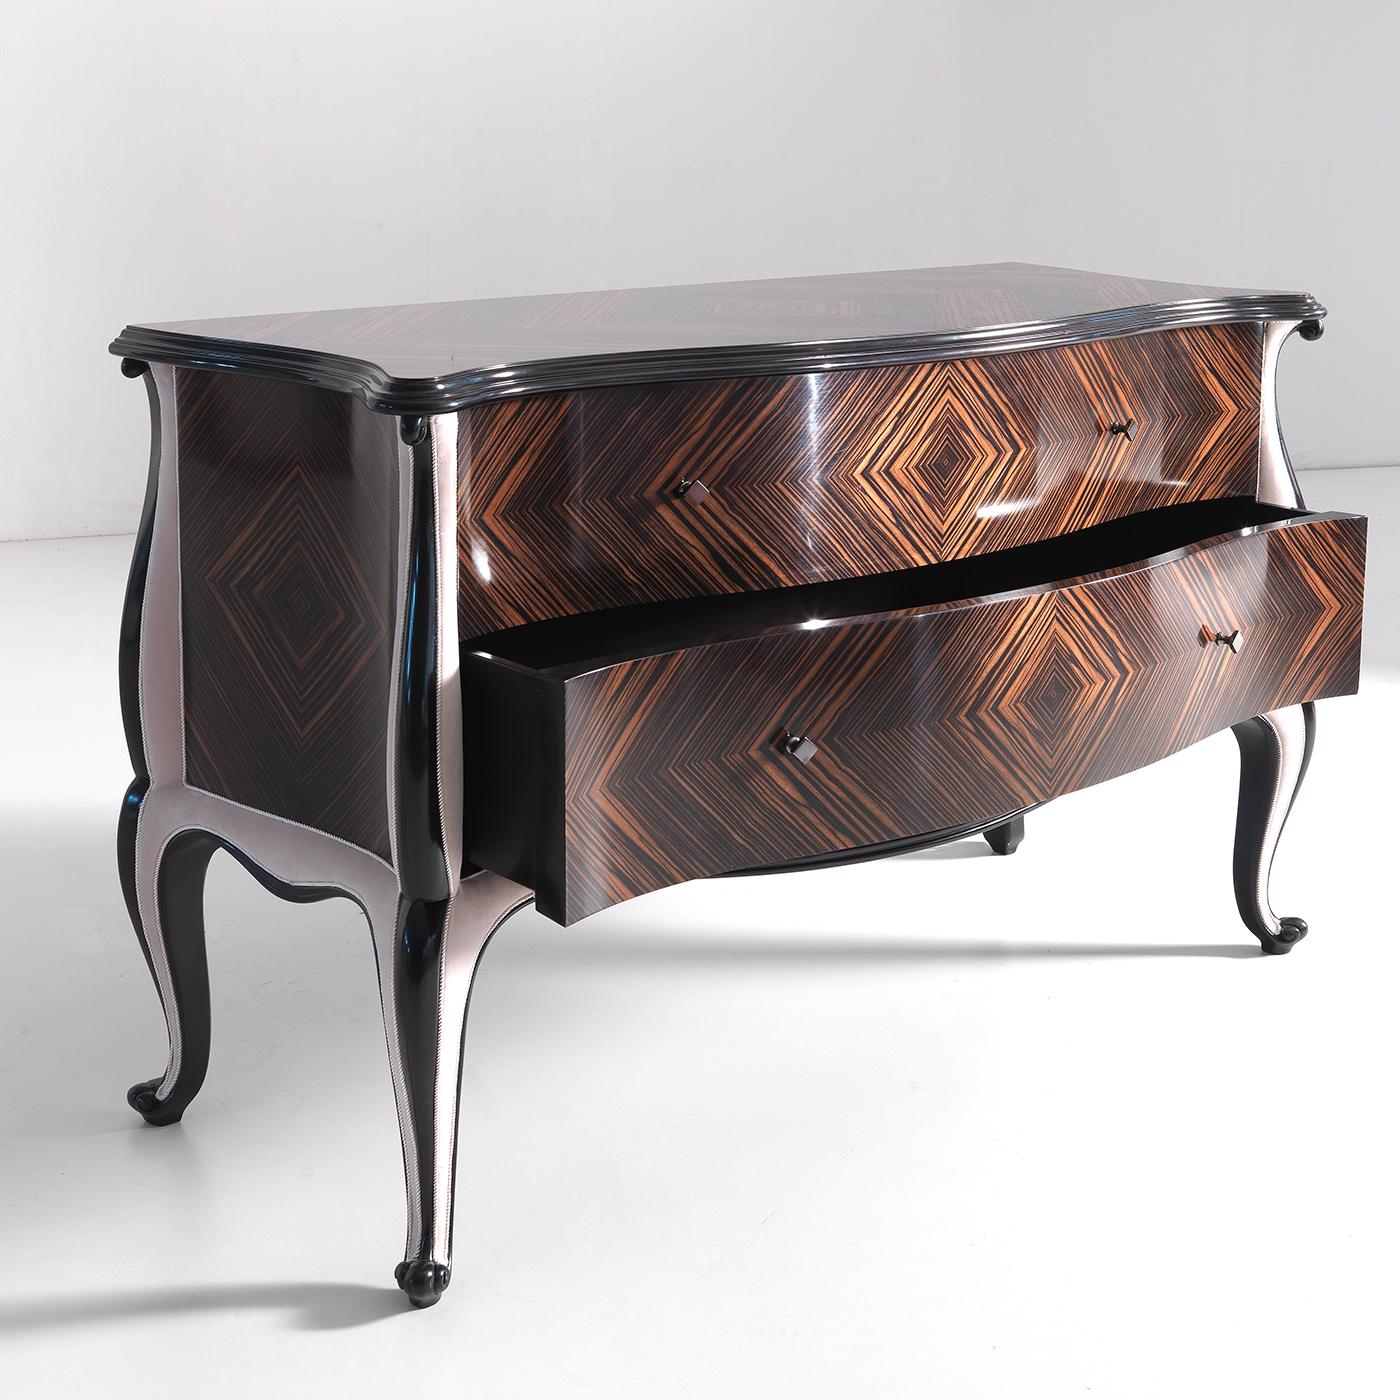 This exquisite dresser echoing clear classic inspiration is distinctive for its soft lines and precious materials. The graceful silhouette in cherry and Makassar ebony boasts the striking natural patterns of the wood's veins harmonizing with the